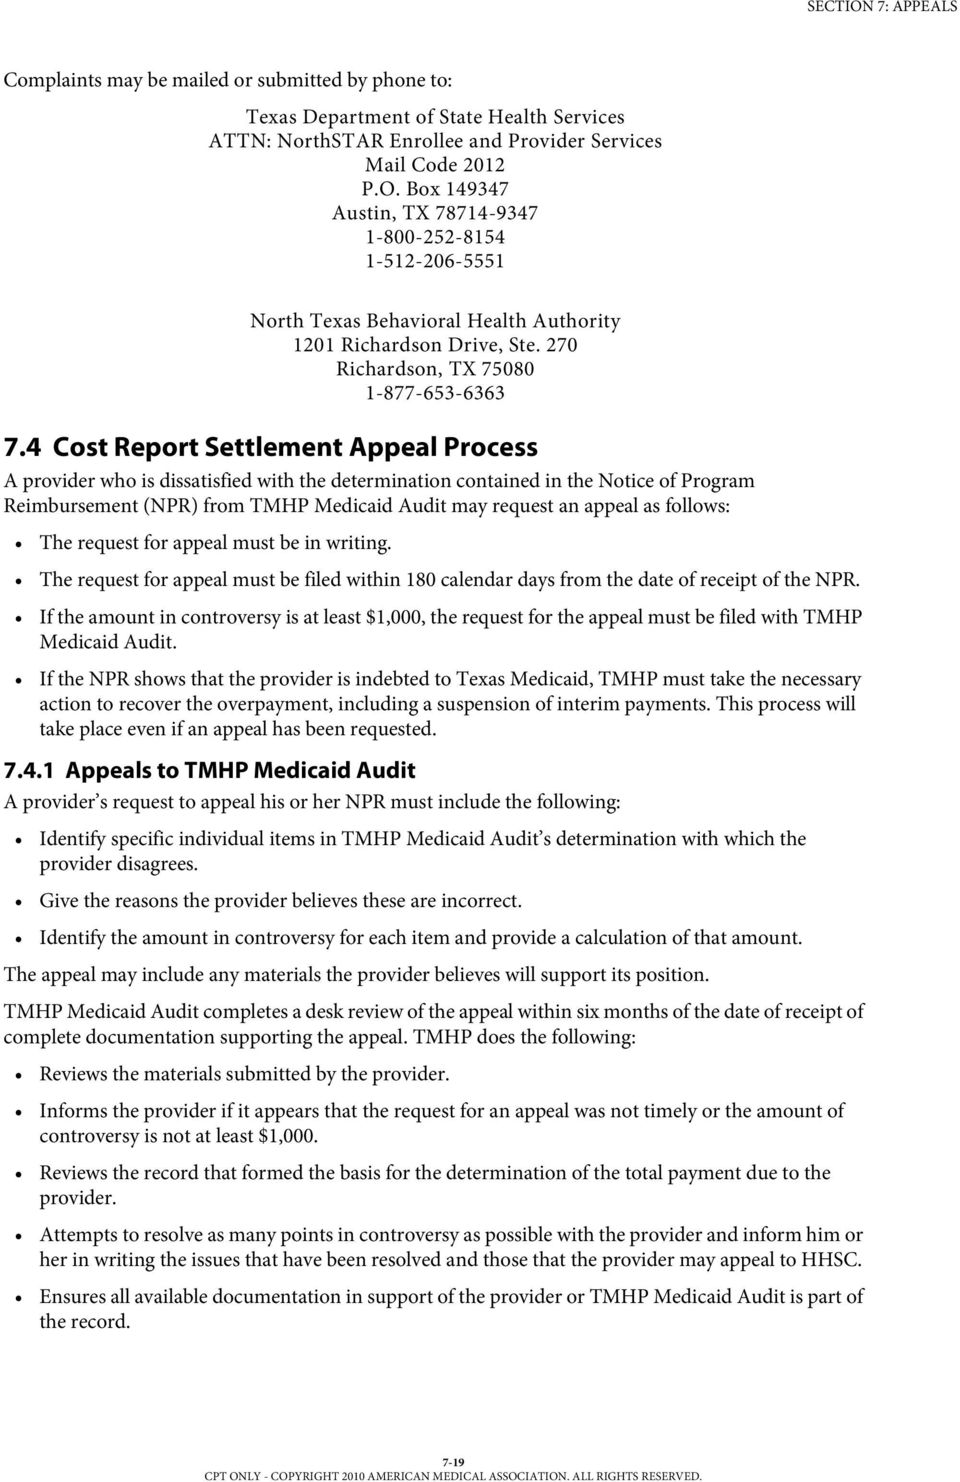 4 Cost Report Settlement Appeal Process A provider who is dissatisfied with the determination contained in the Notice of Program Reimbursement (NPR) from TMHP Medicaid Audit may request an appeal as